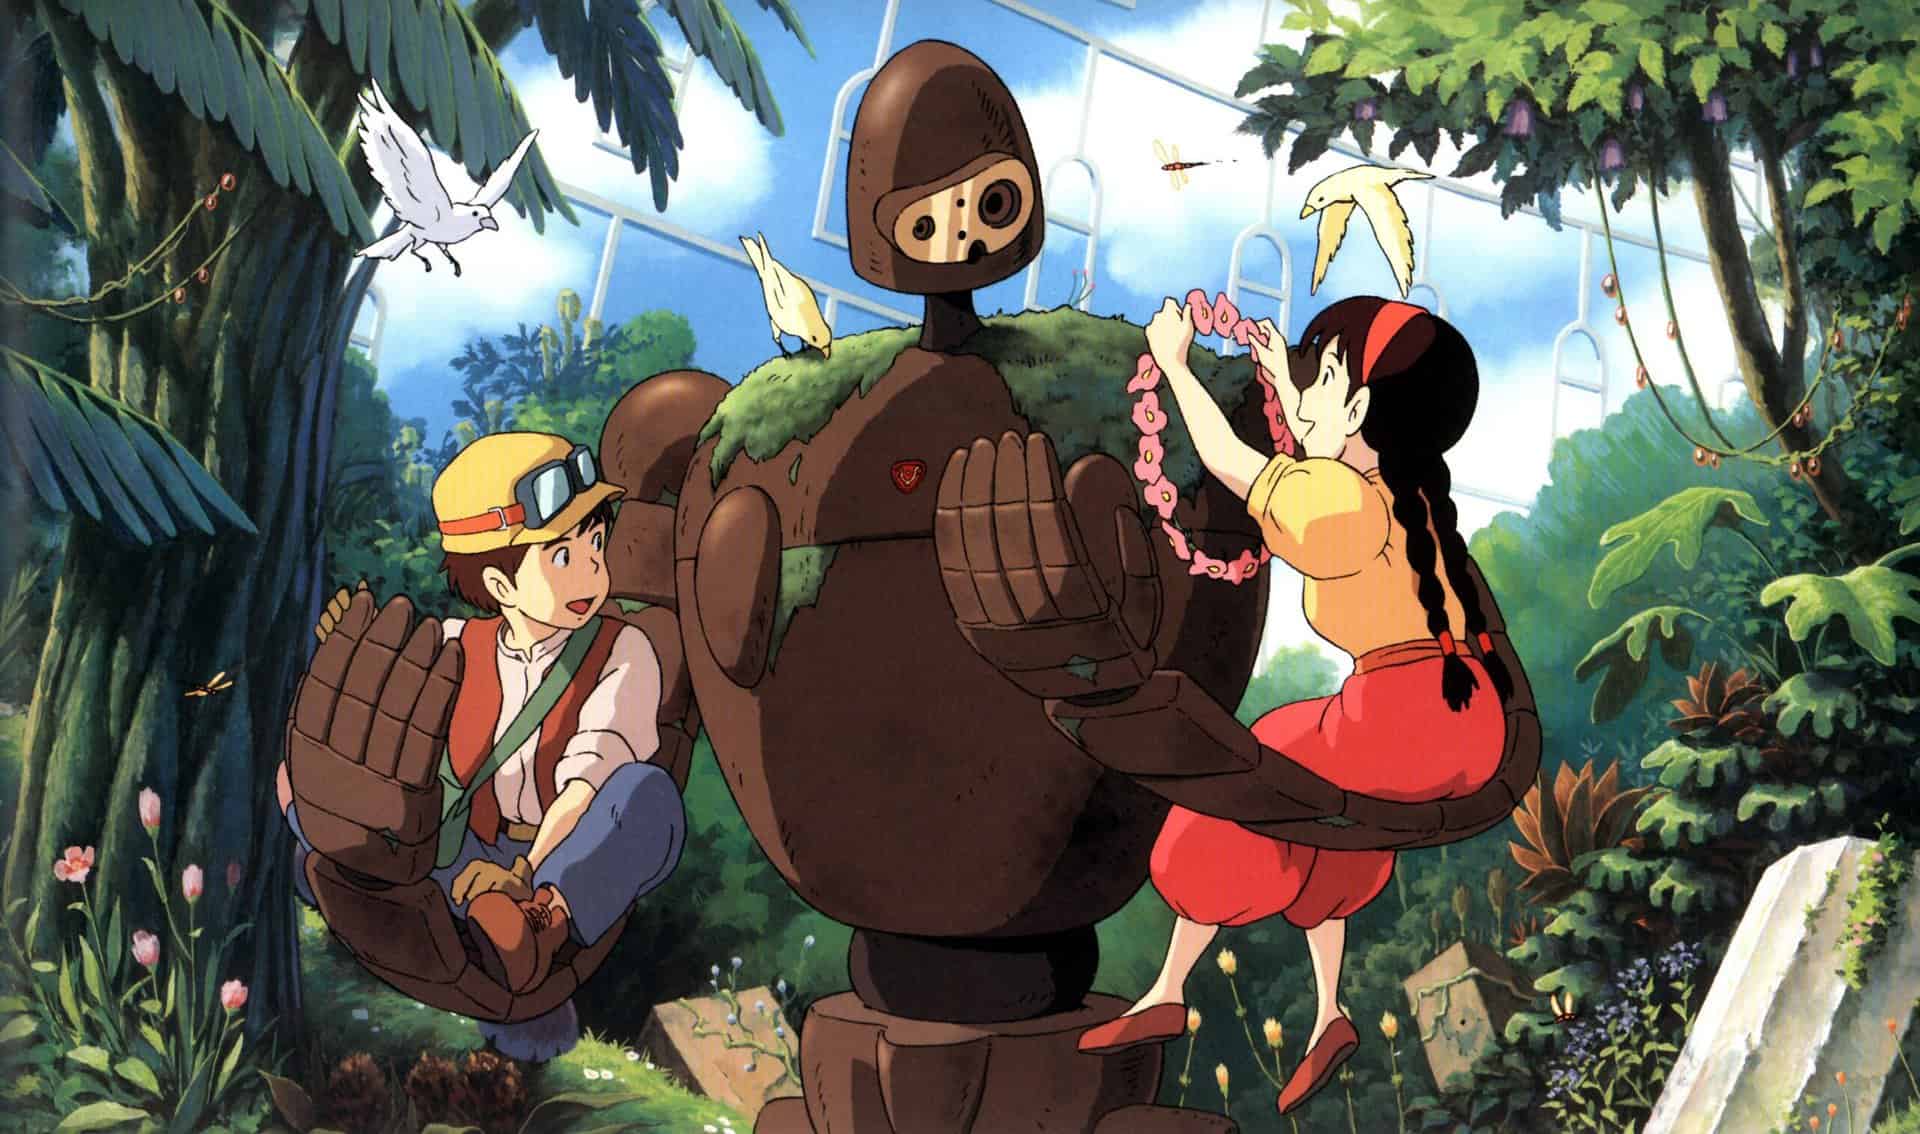 Still from Castle in the Sky